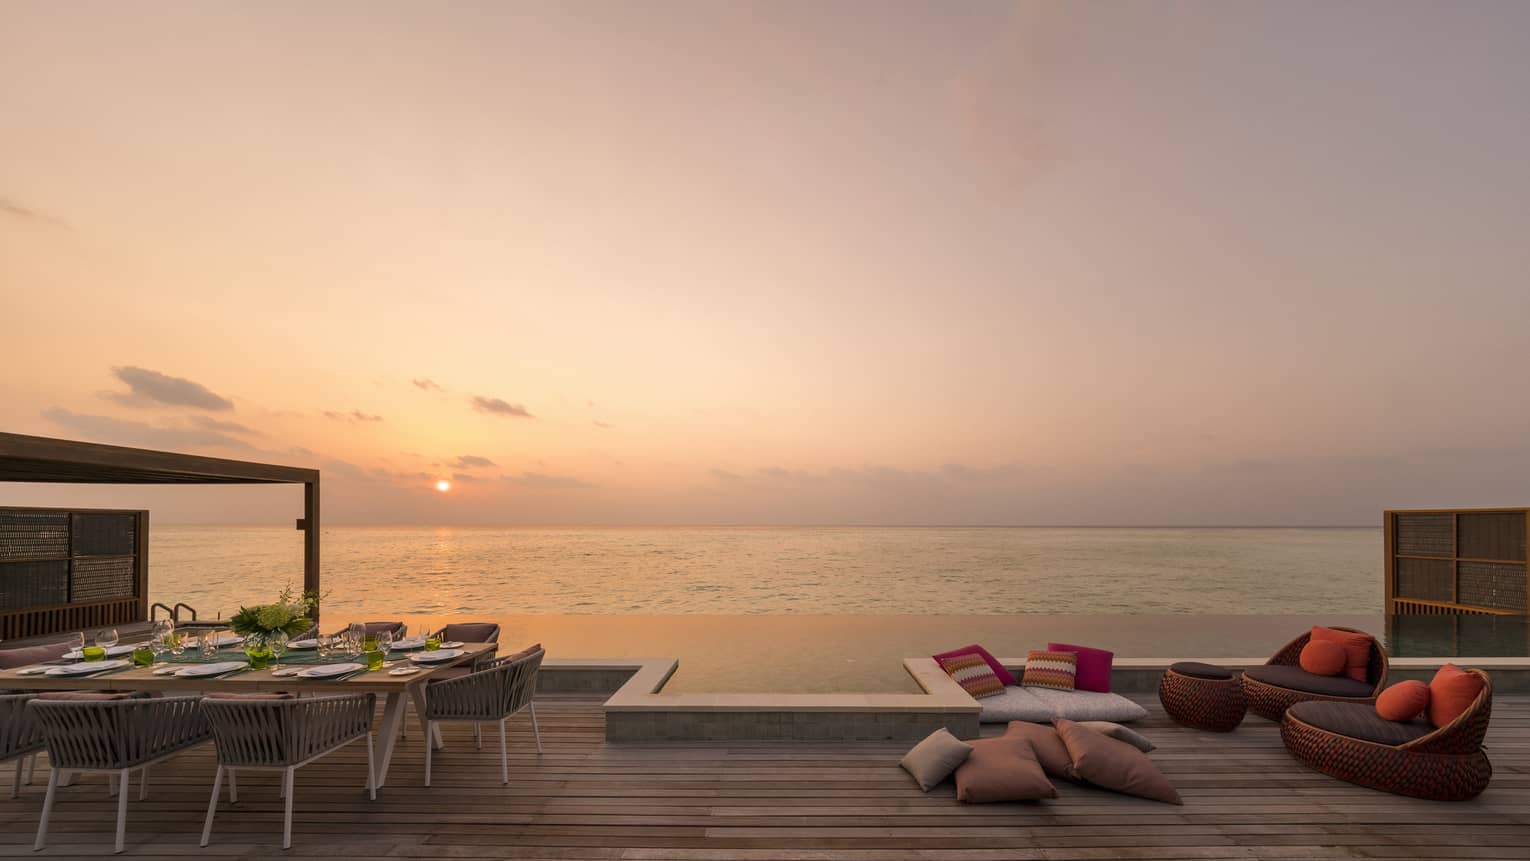 Large wooden deck with dining table and lounge chairs, overlooking an ocean sunset